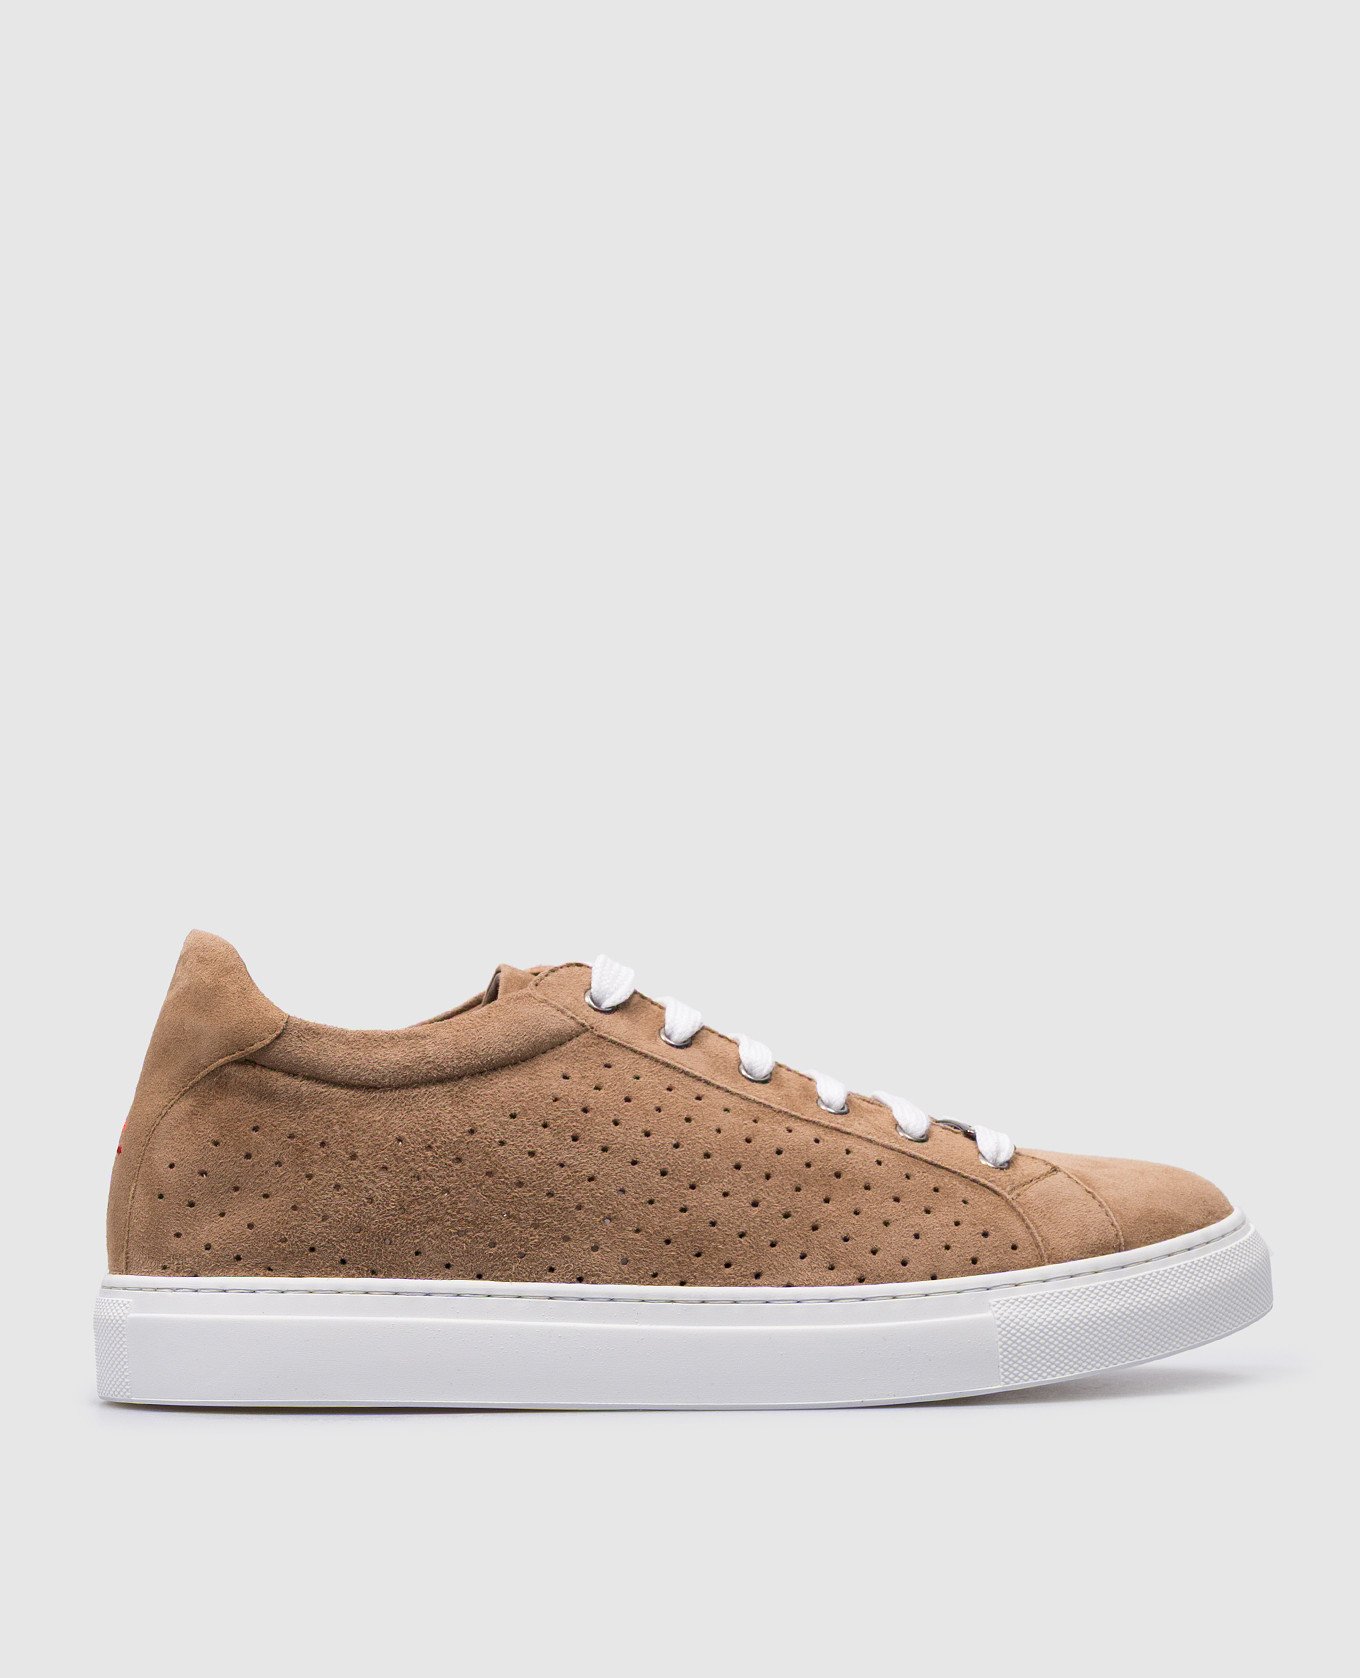 Brown suede sneakers with perforations